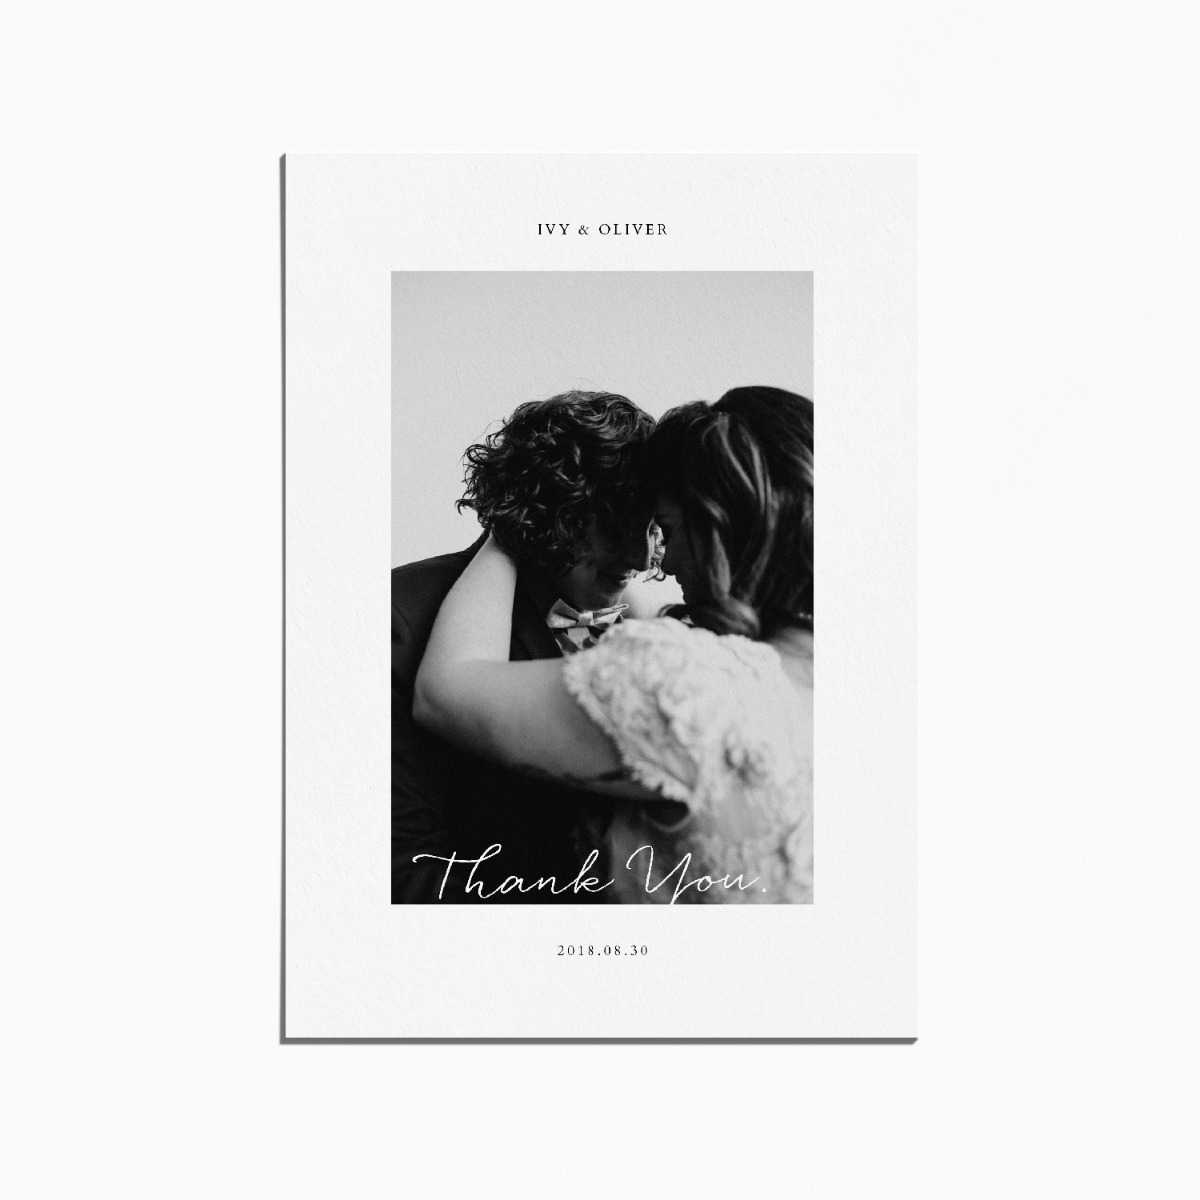 thank you card with an image of a married couple embracing